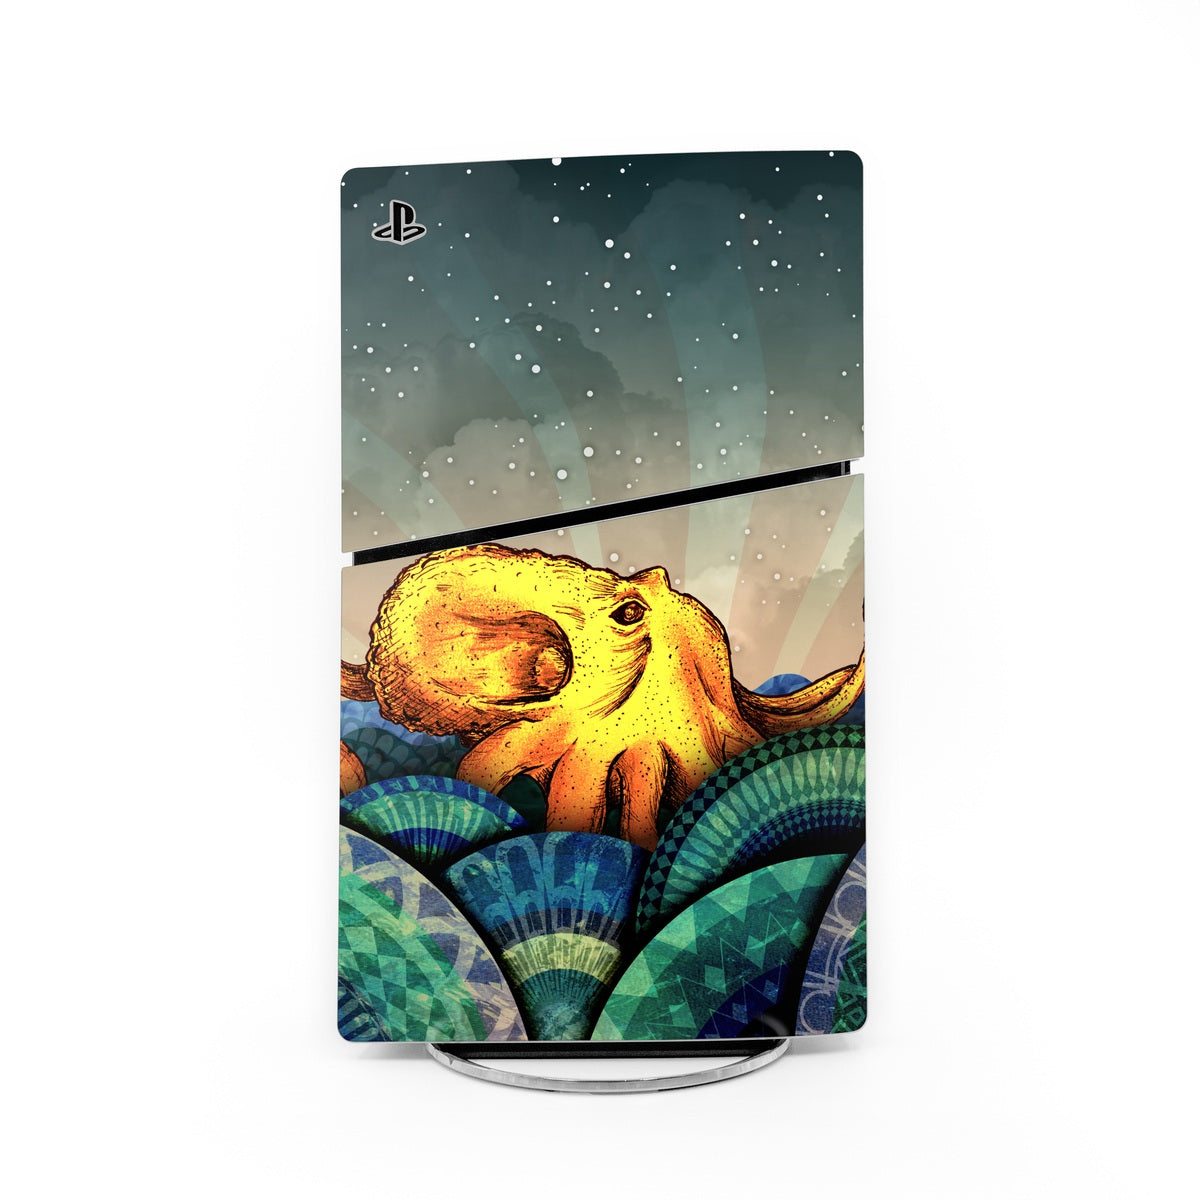 From the Deep - Sony PS5 Slim Skin